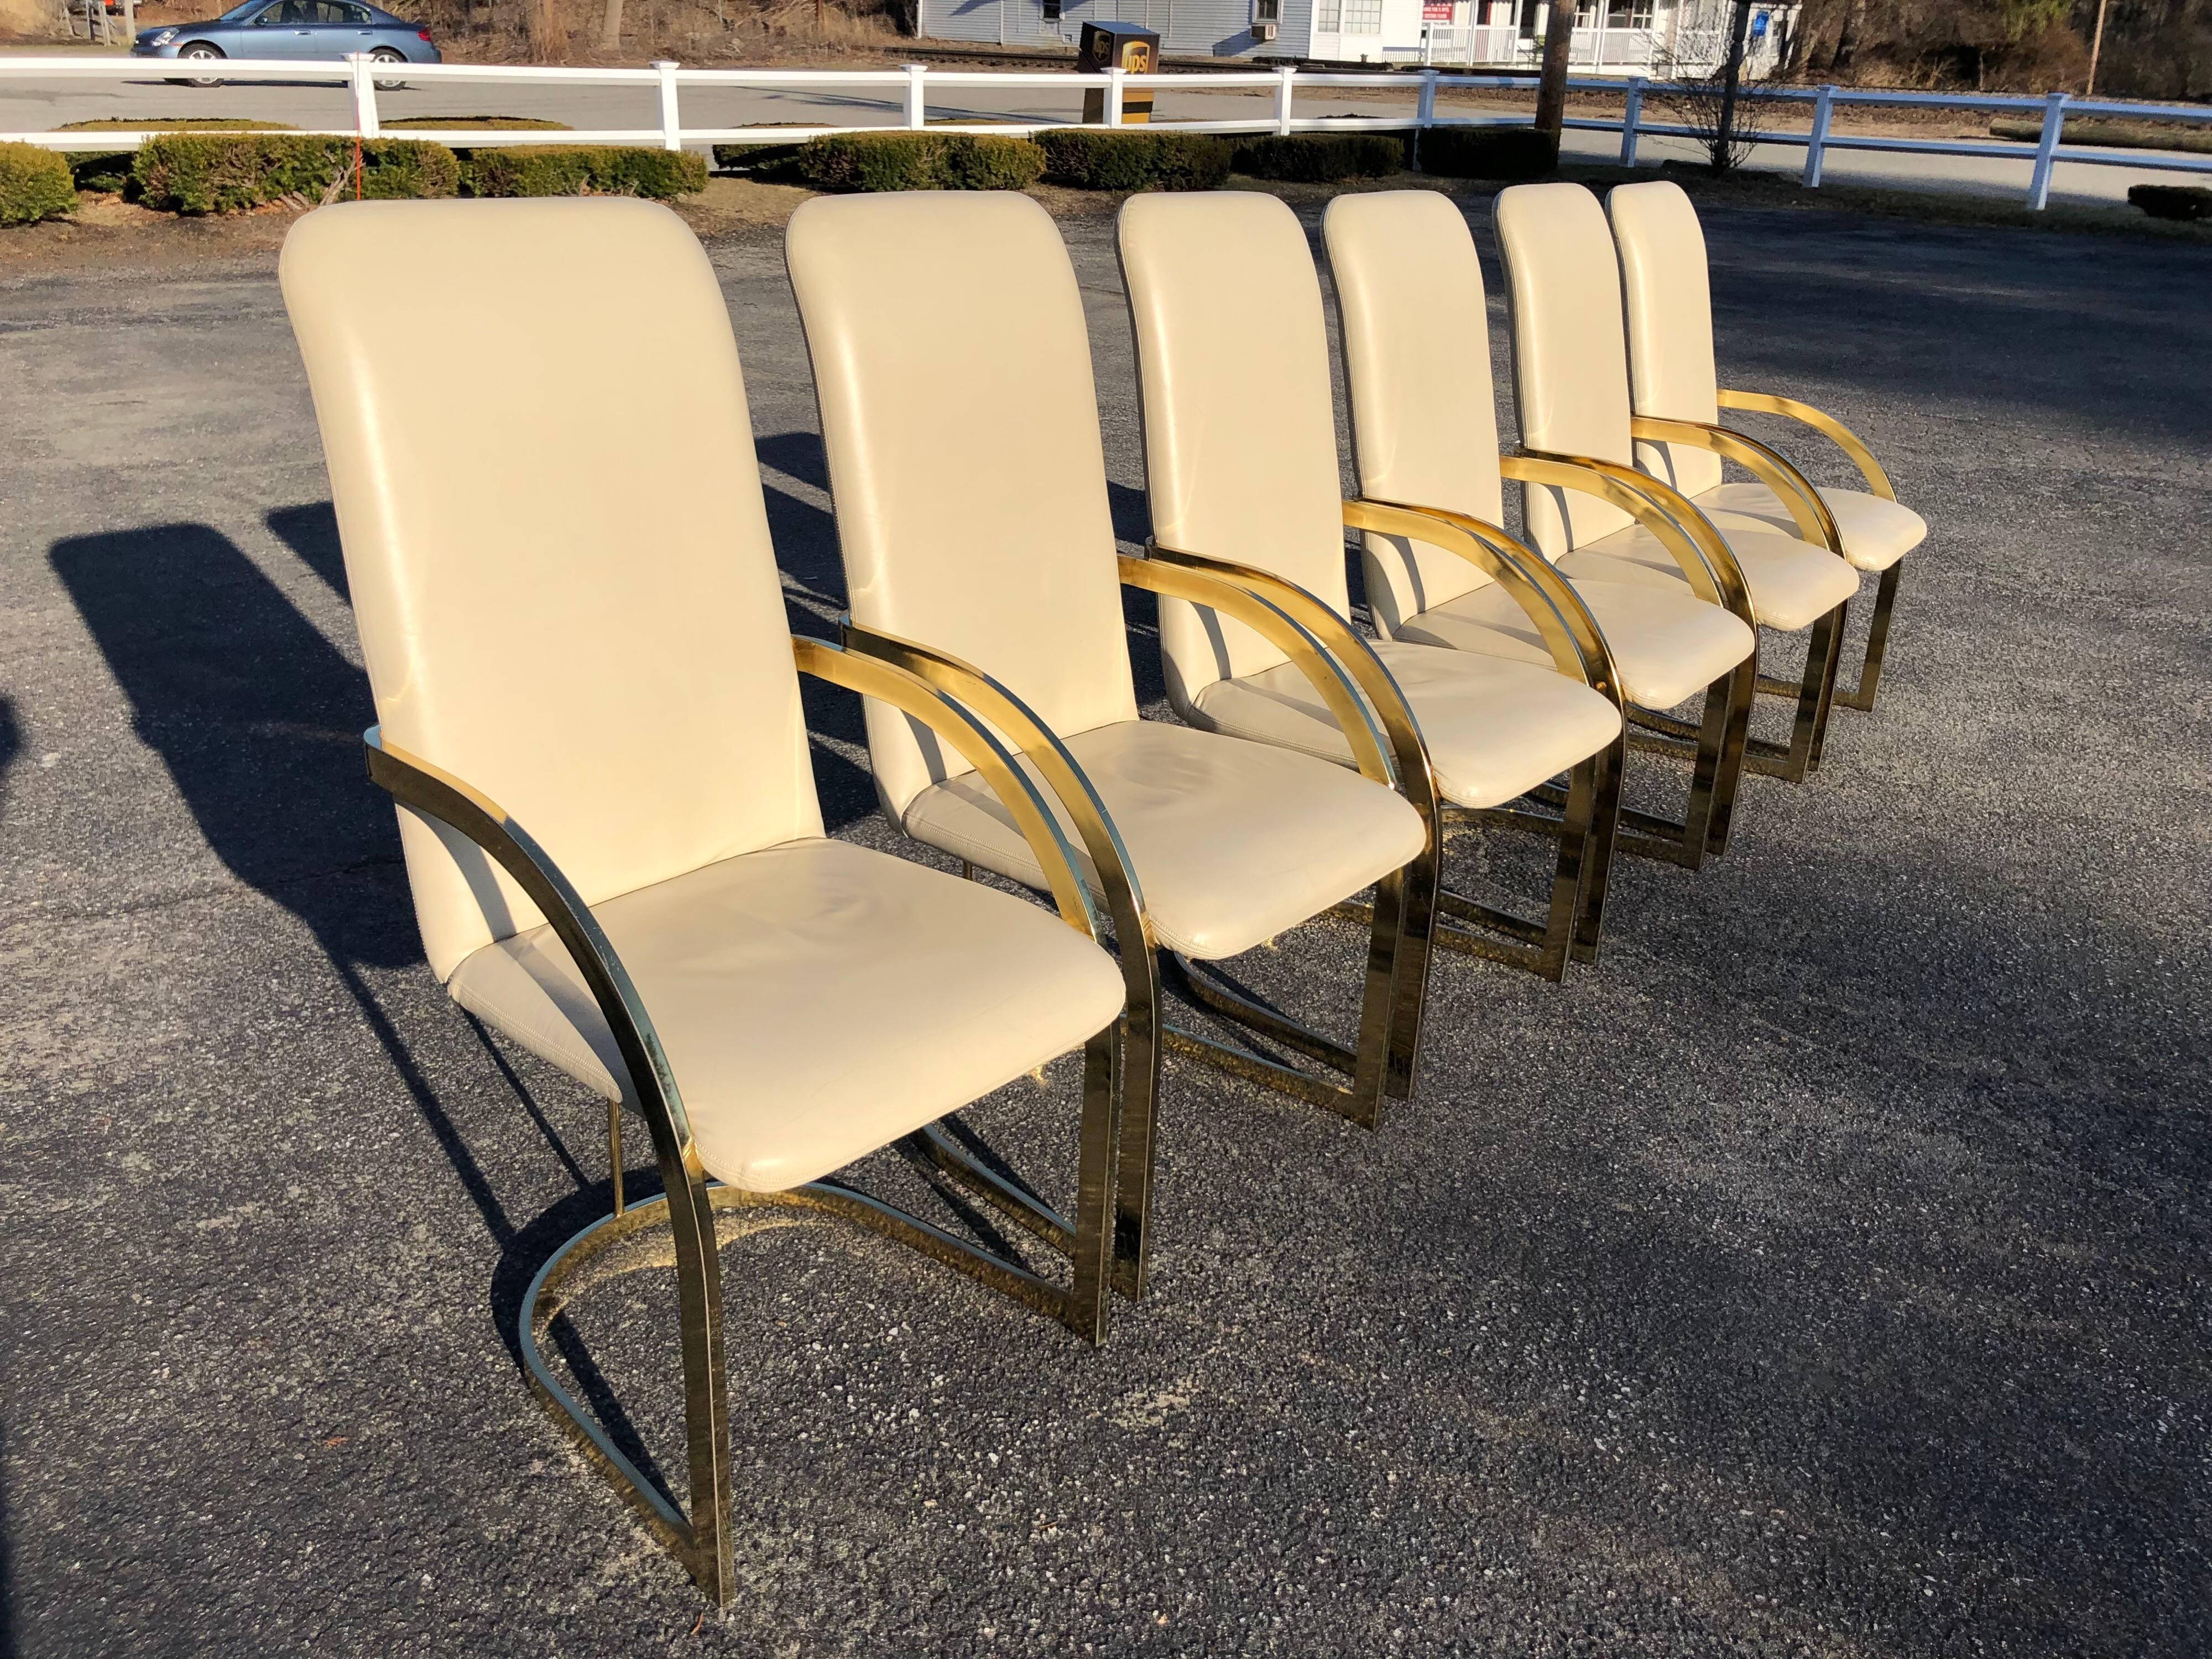 Milo Baughman style brass and leather set of chairs. Gorgeous from any angle these chairs are extremely comfortable and support with their high backs. Seat width is 18.75, seat depth is 18.50. The top of the arm rests are 26.75. Very good vintage